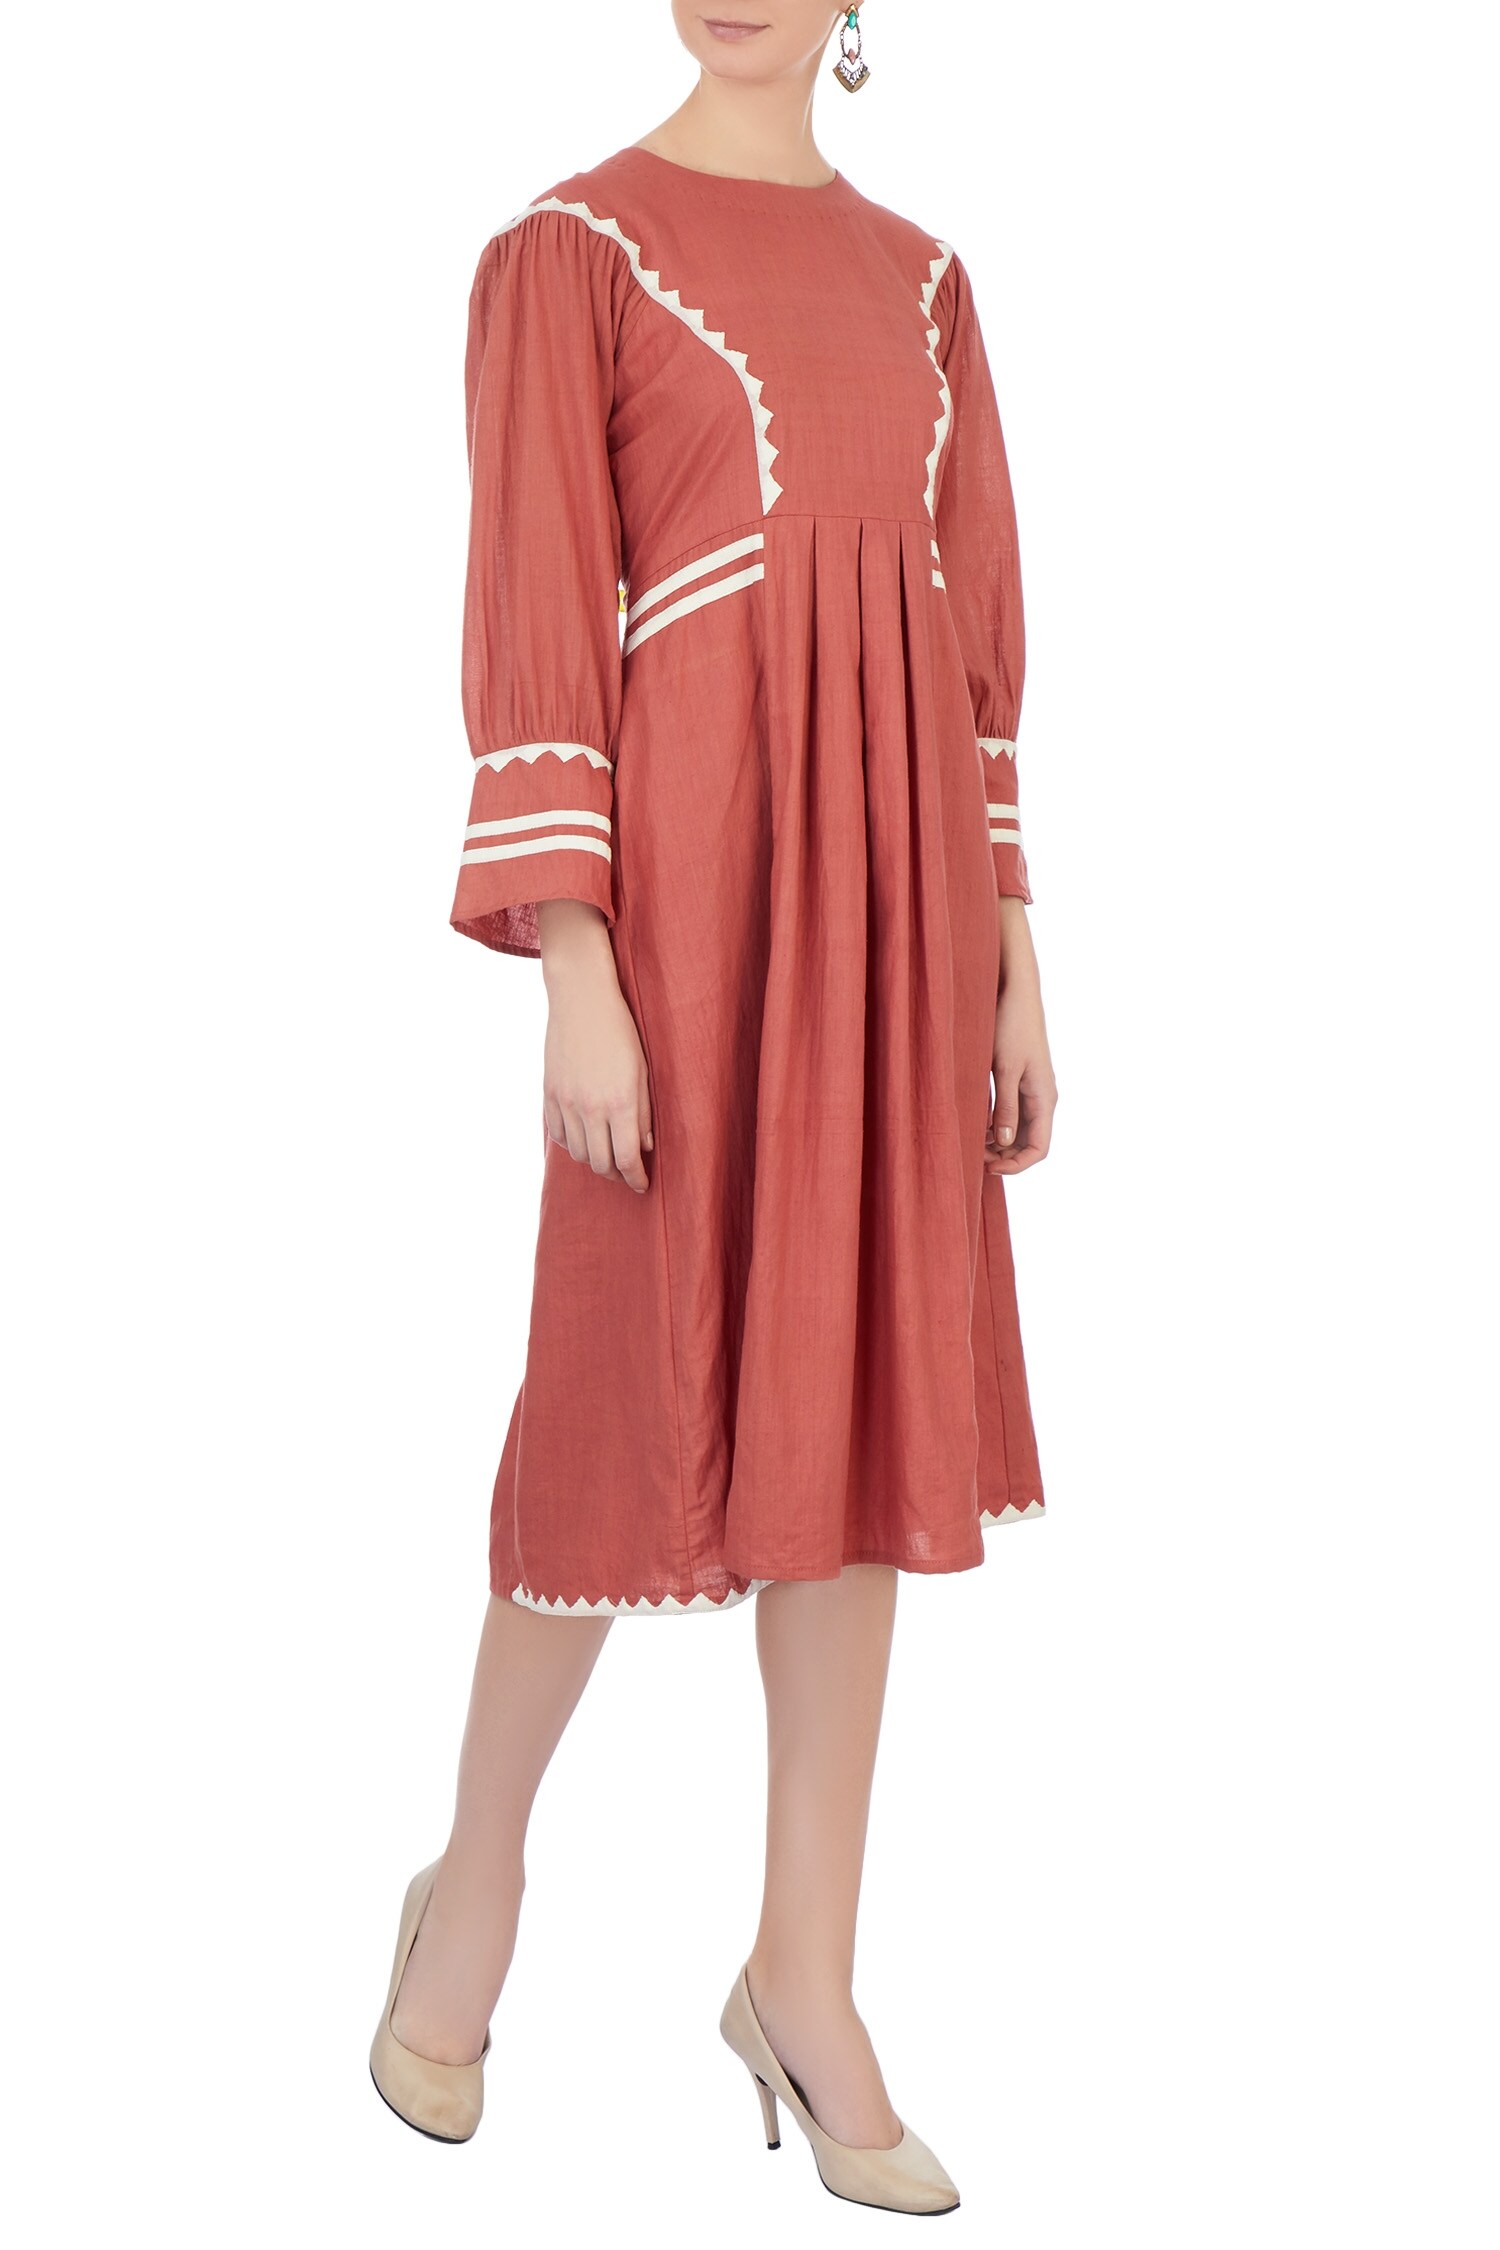 Chambray & Co. Coral Round Pleated Linen Dress For Women